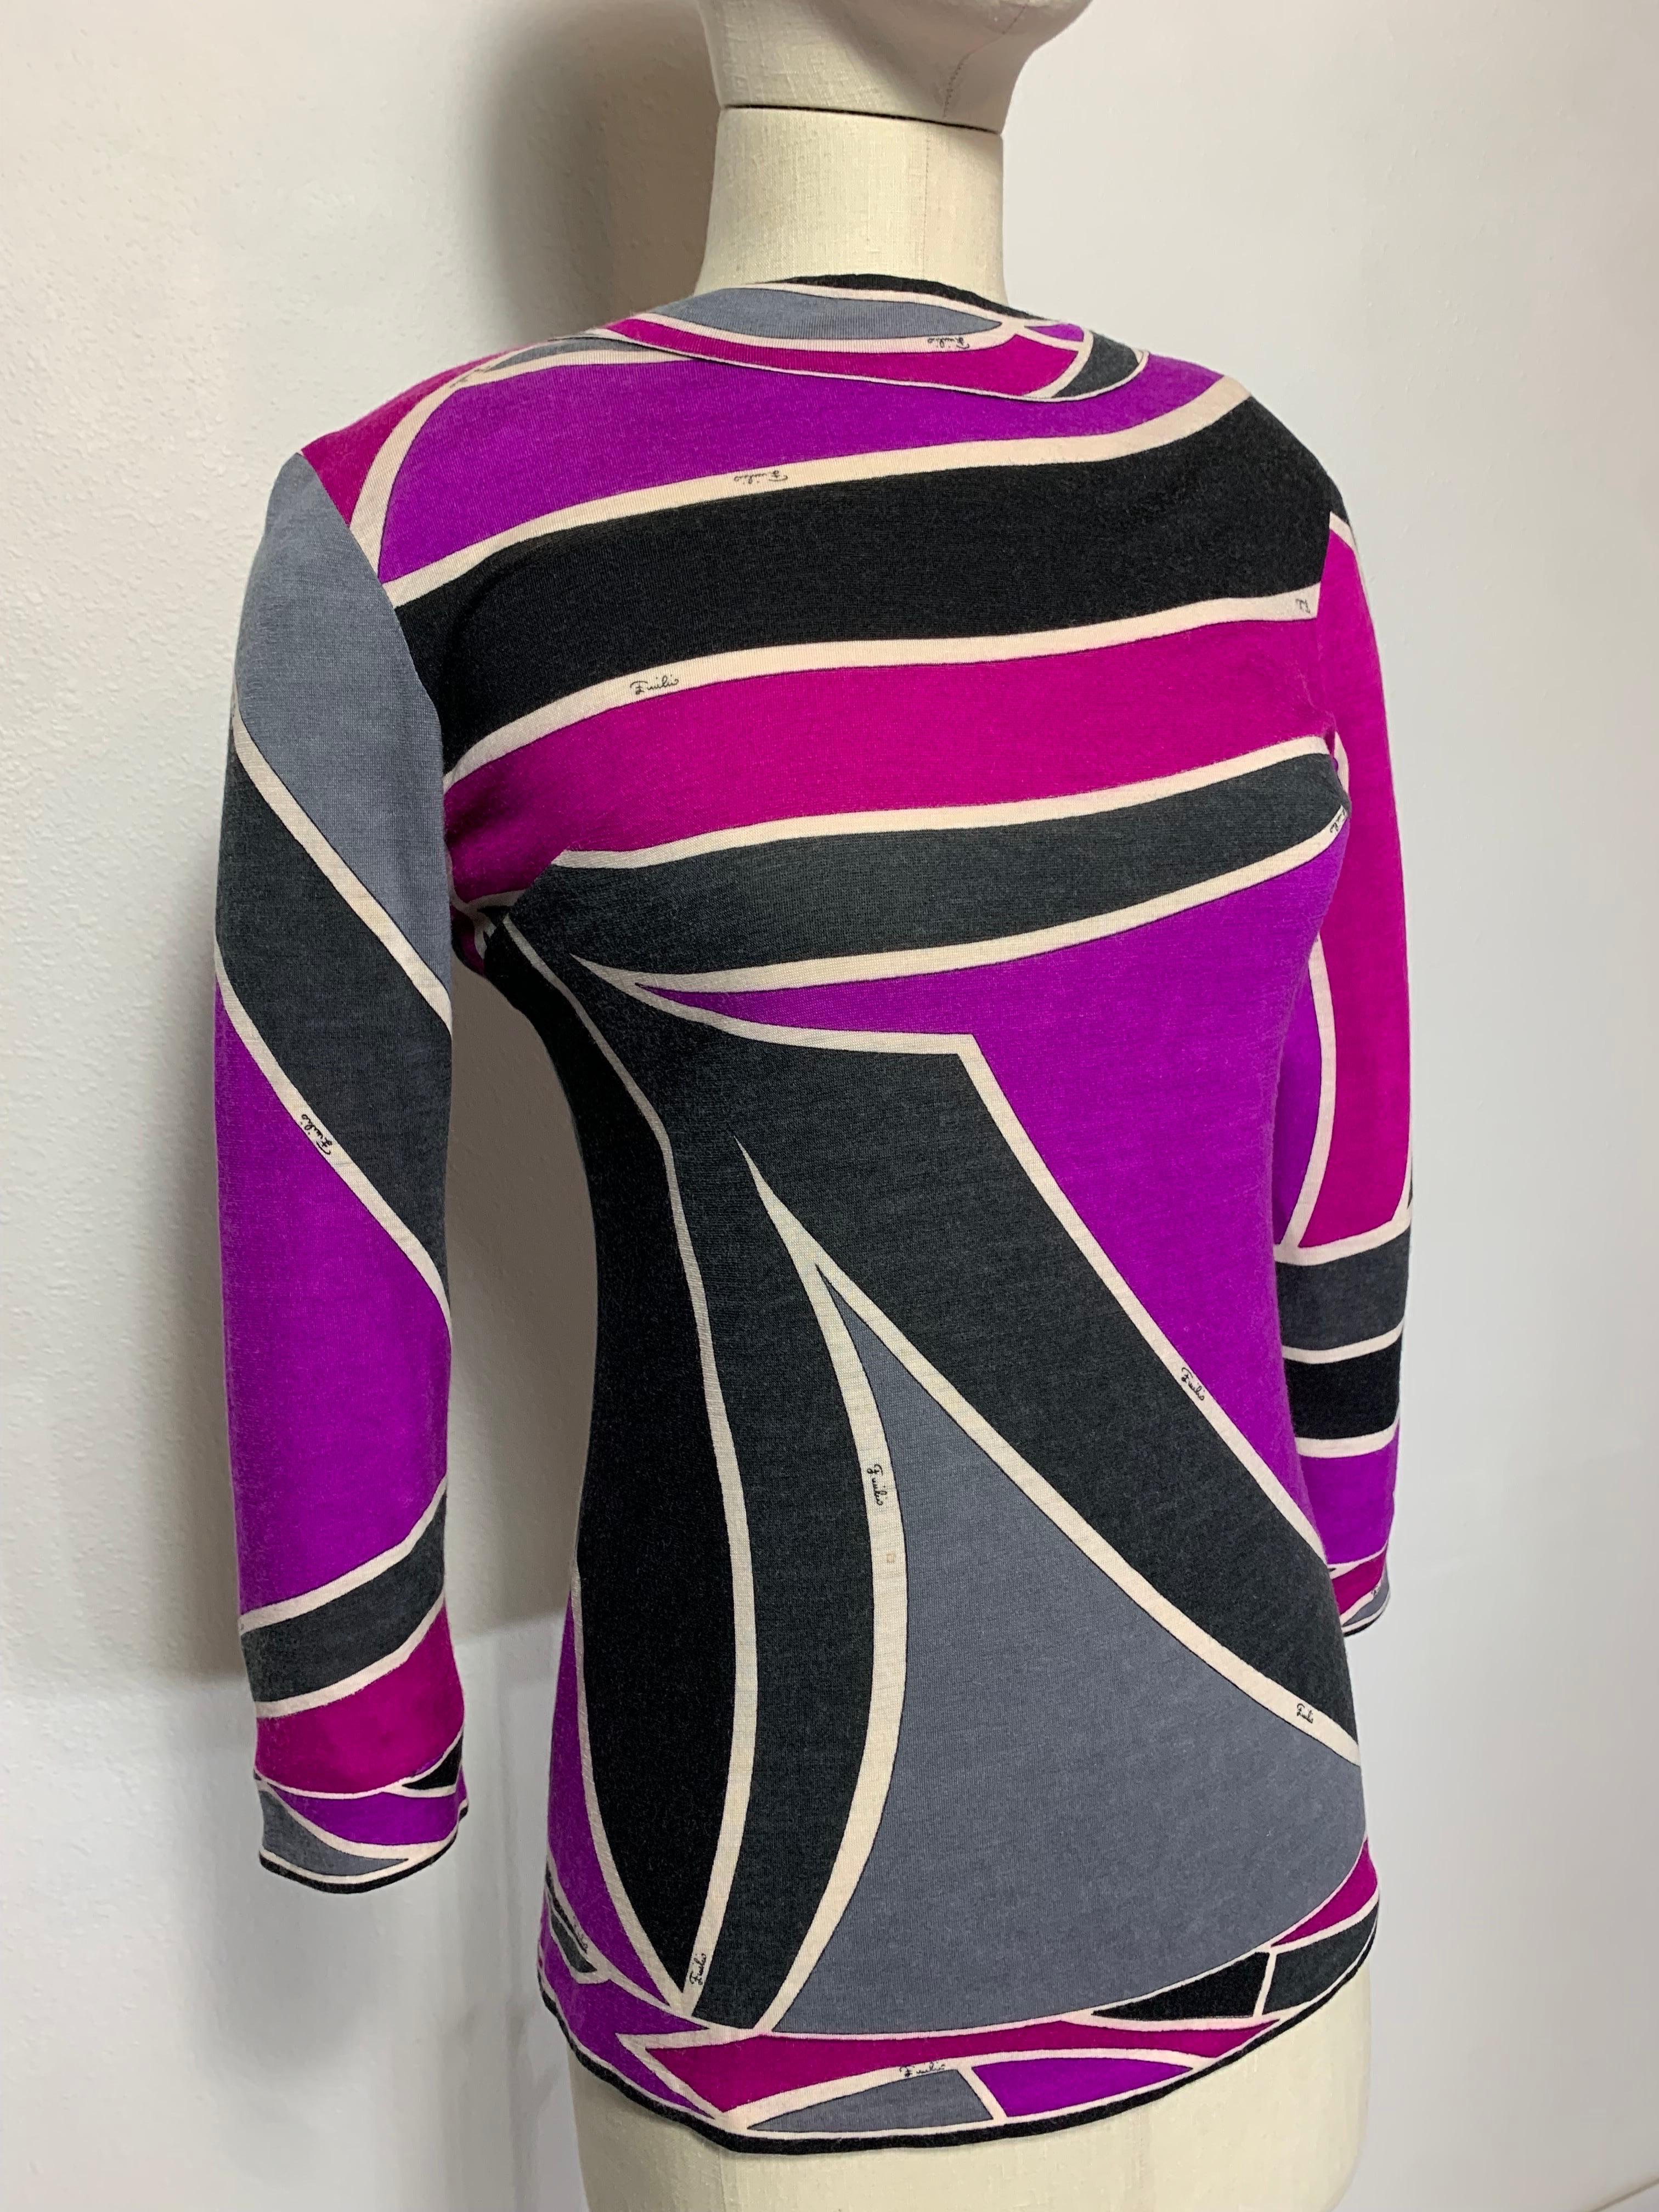 1960s Emilio Pucci Cashmere & Silk Graphic Print Knit Pullover Sweater  In Excellent Condition For Sale In Gresham, OR